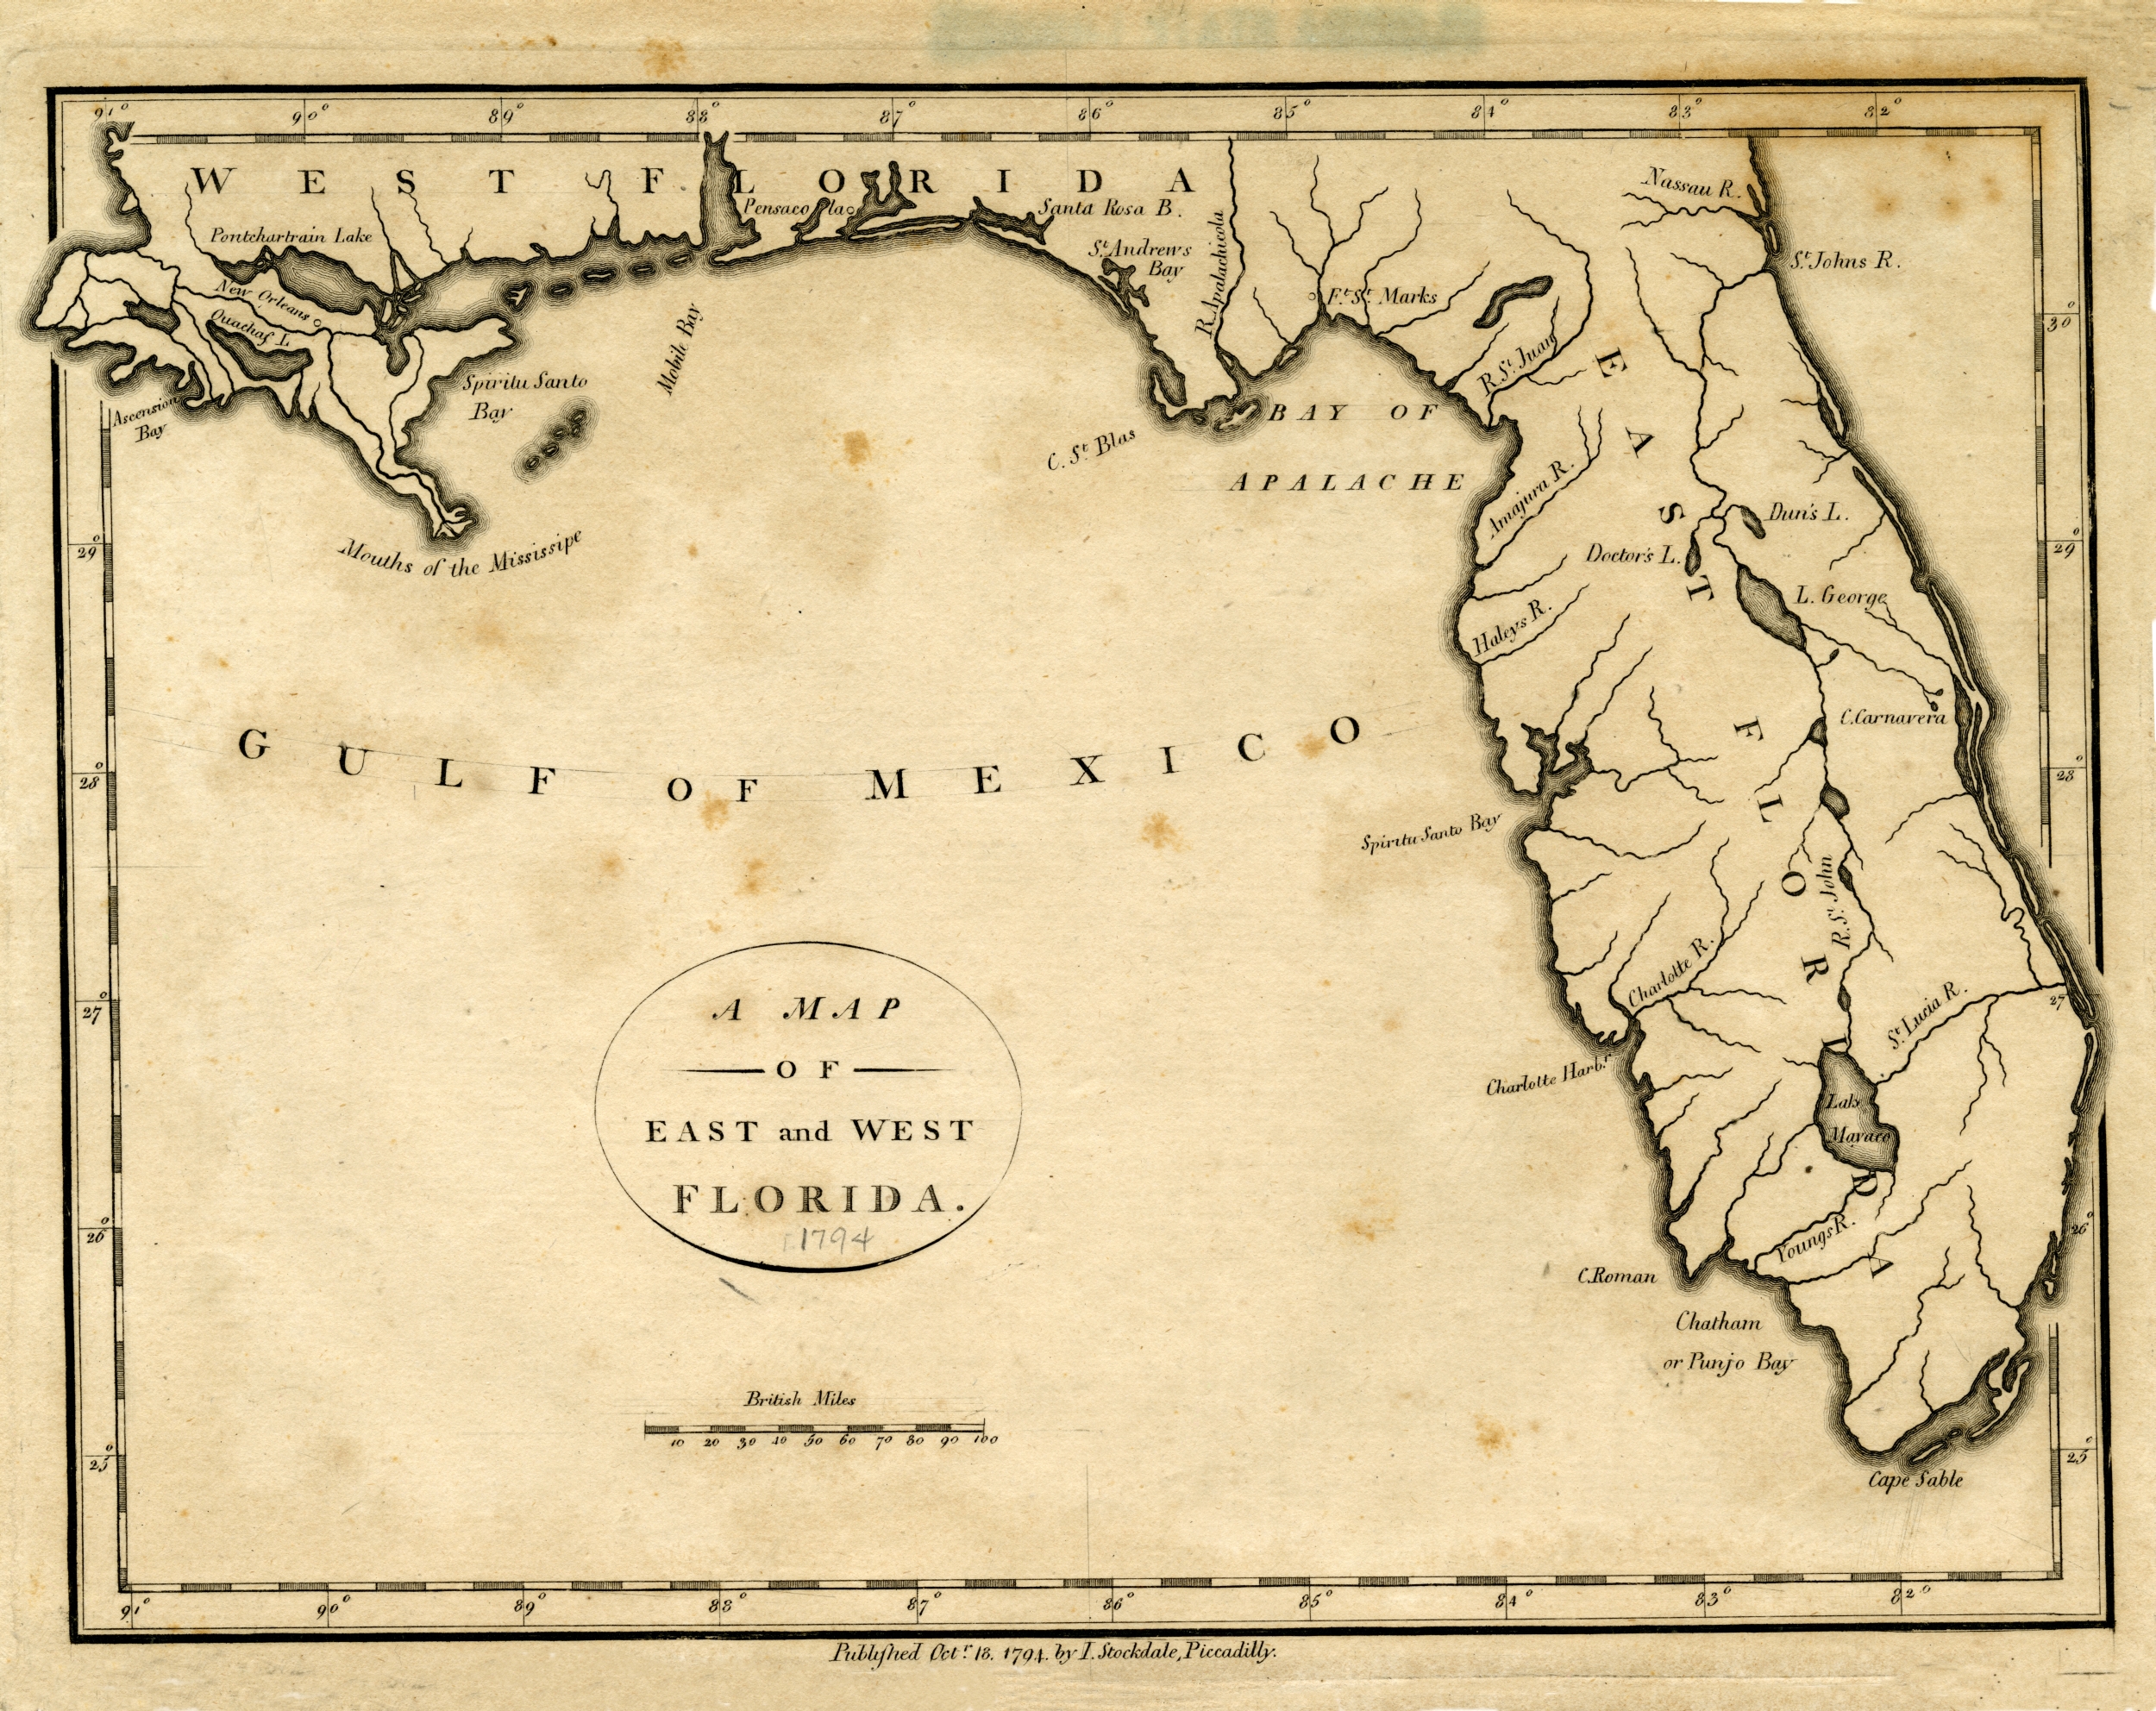 Stockdale's Map of East and West Florida, 1794